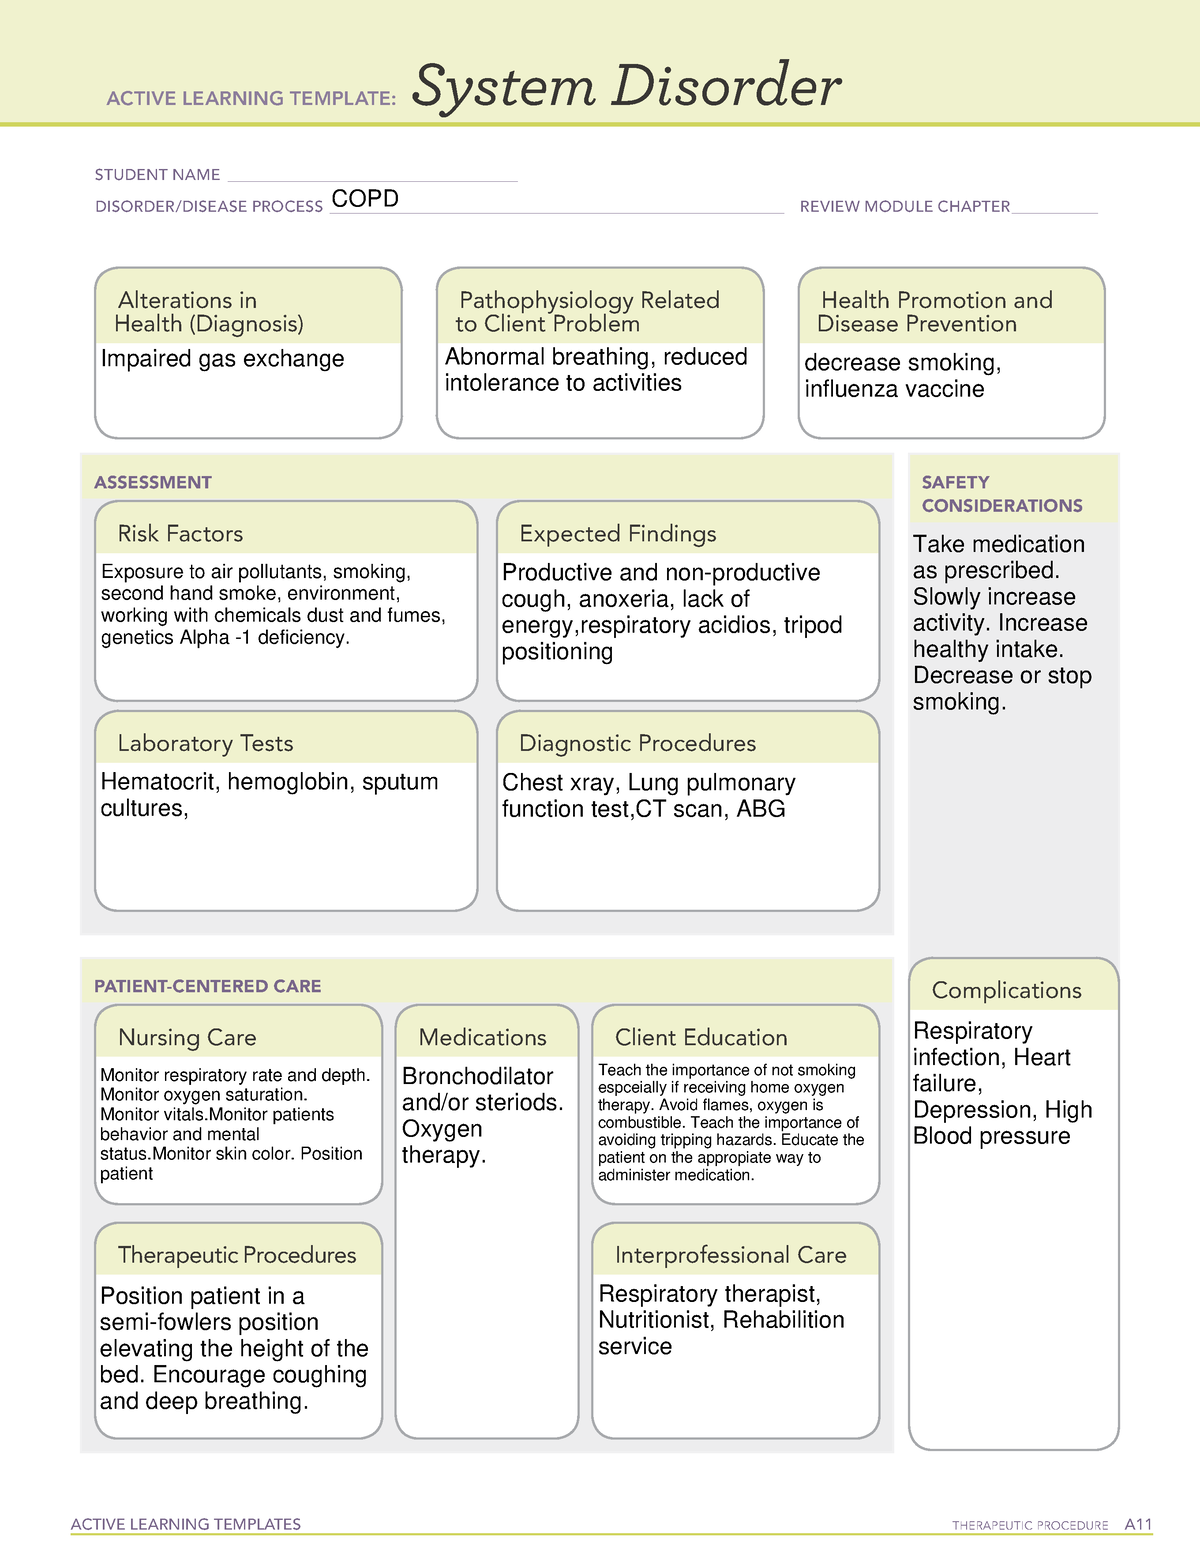 copd-active-learning-template-active-learning-templates-therapeutic-procedure-a-system